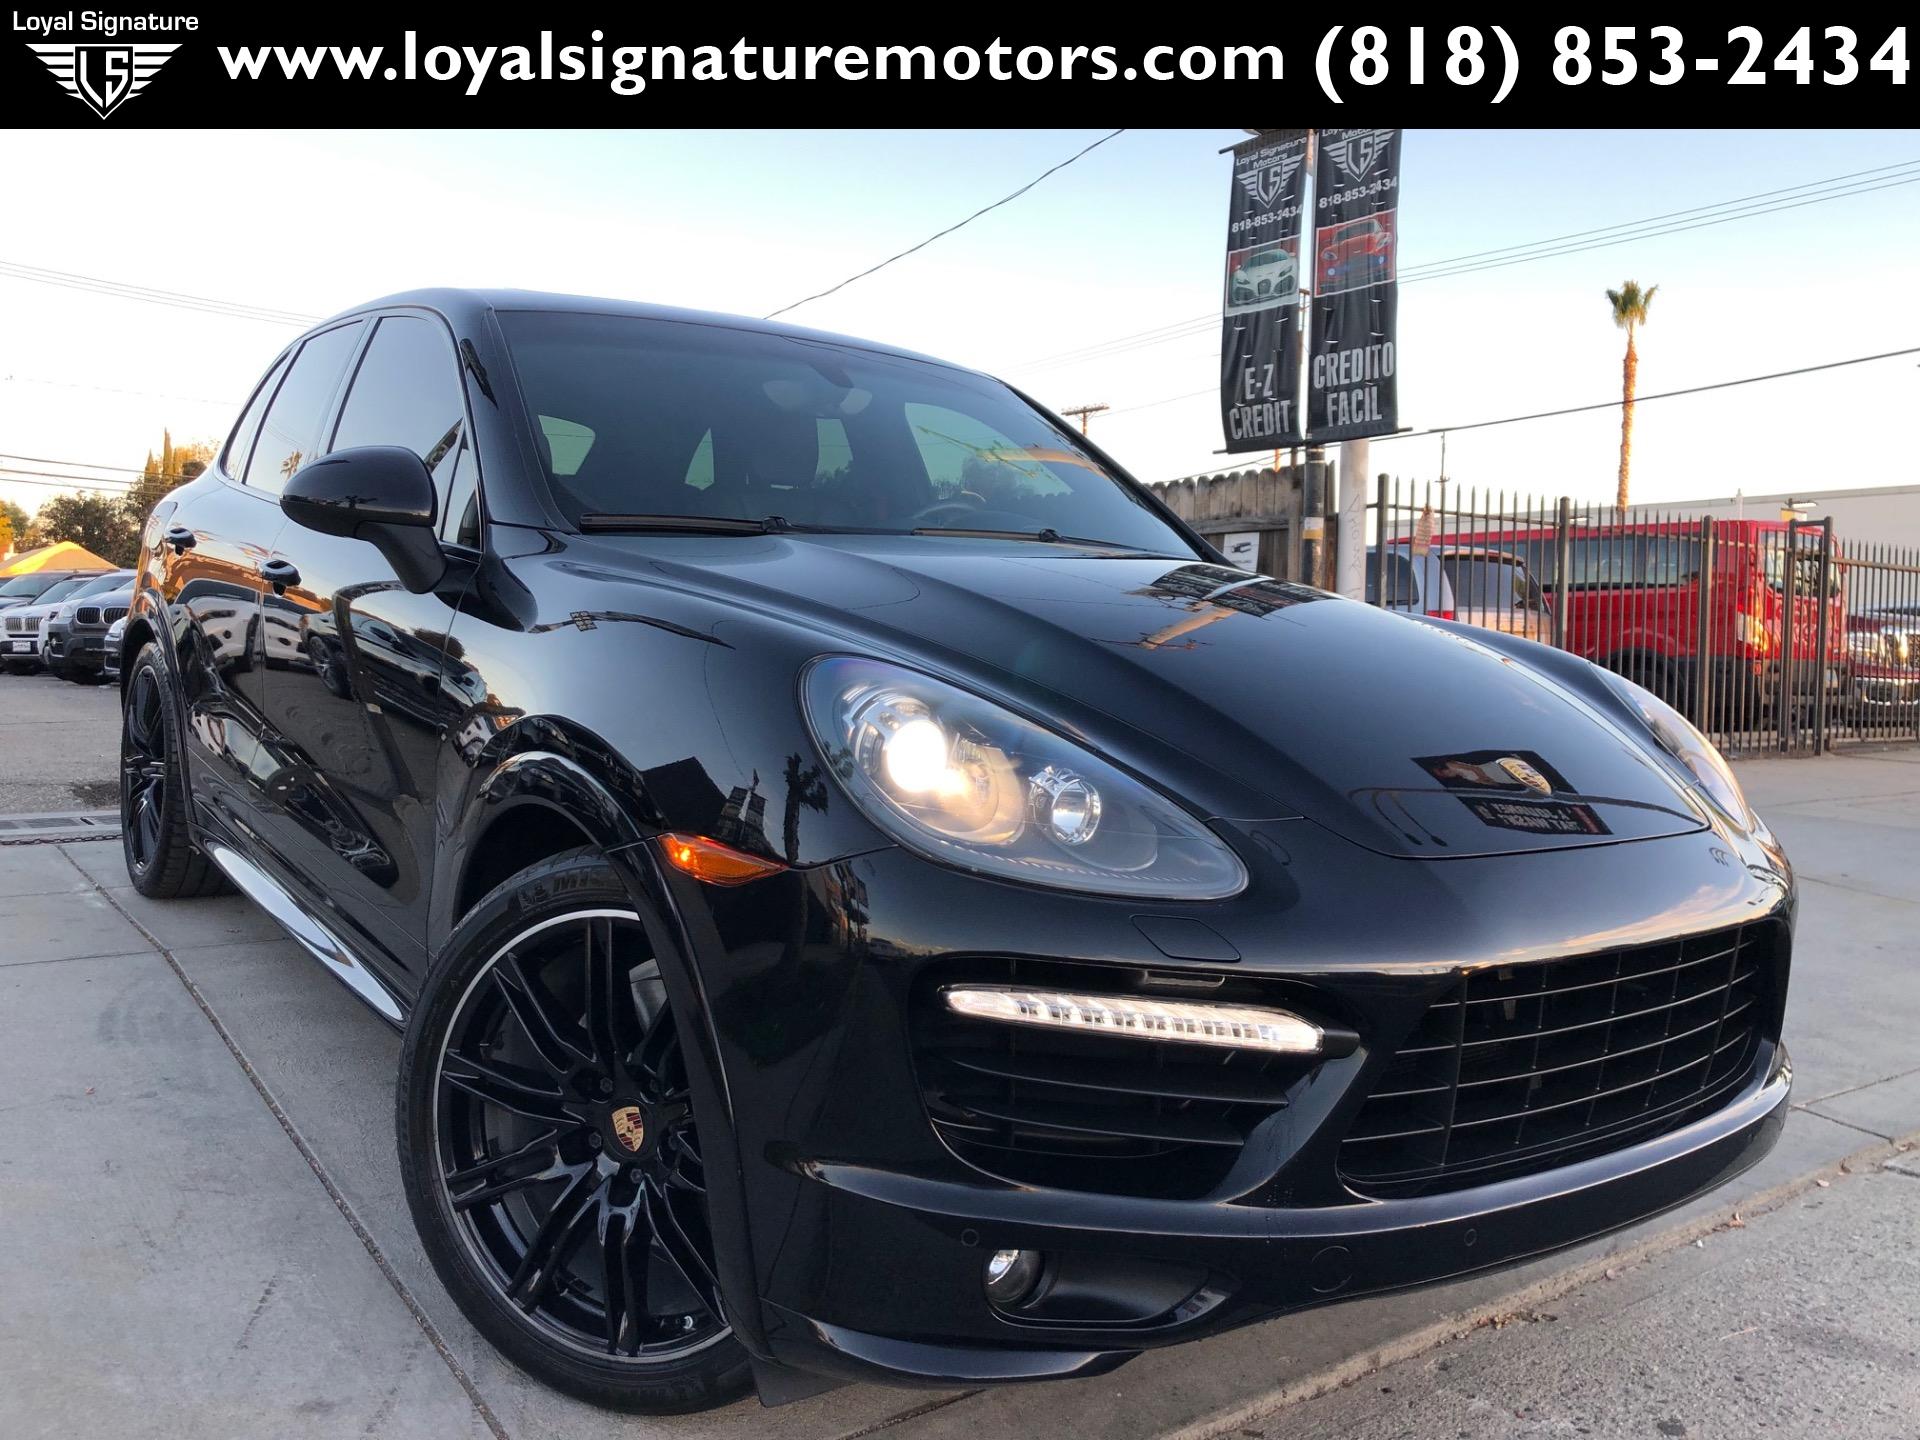 Used 2013 Porsche Cayenne Gts For Sale 35995 Loyal